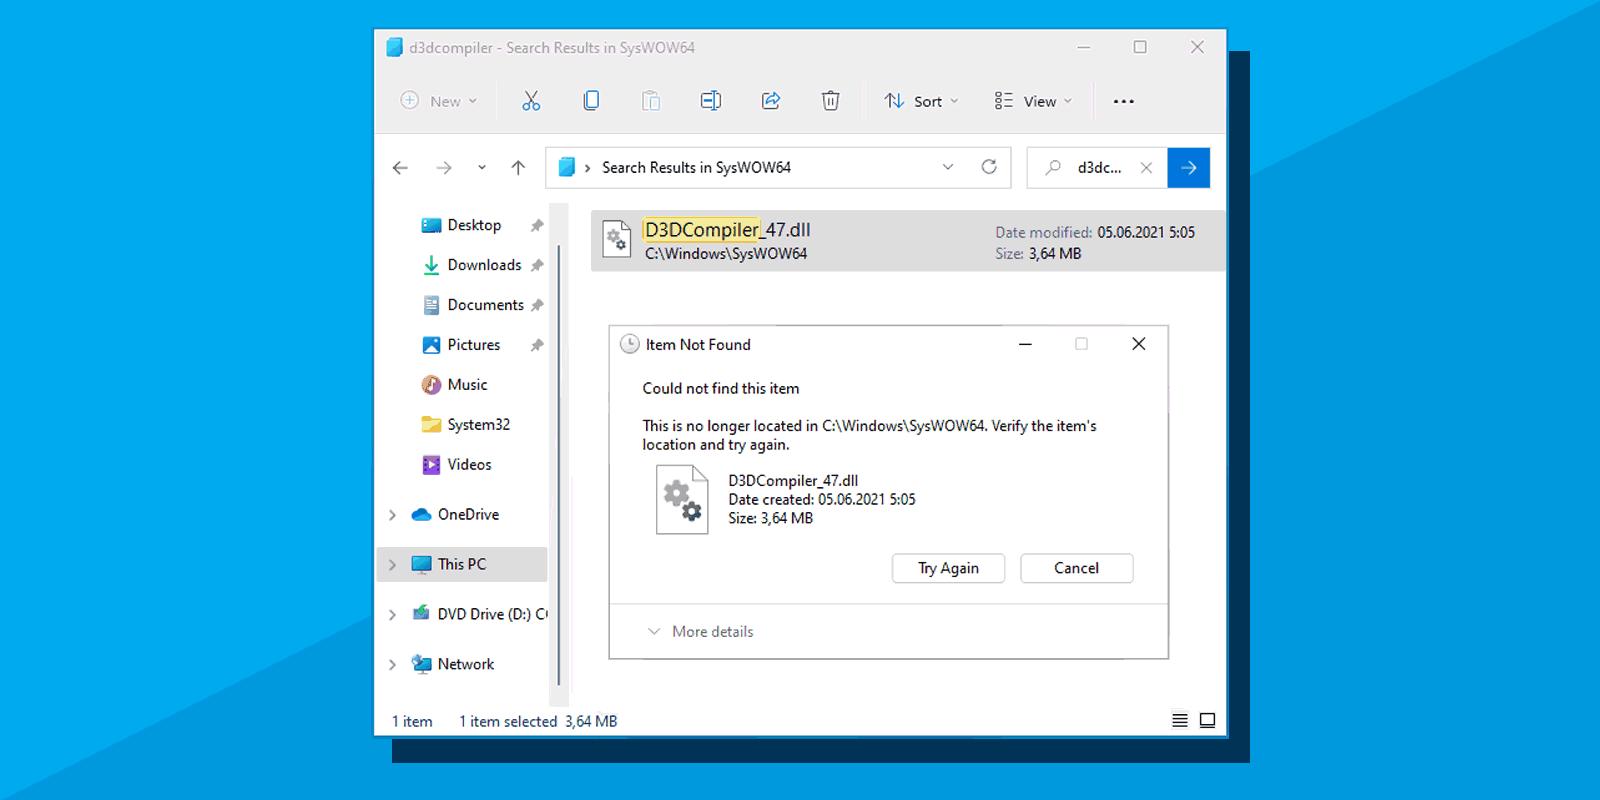 Could not find this item while deleting file or folder in Windows